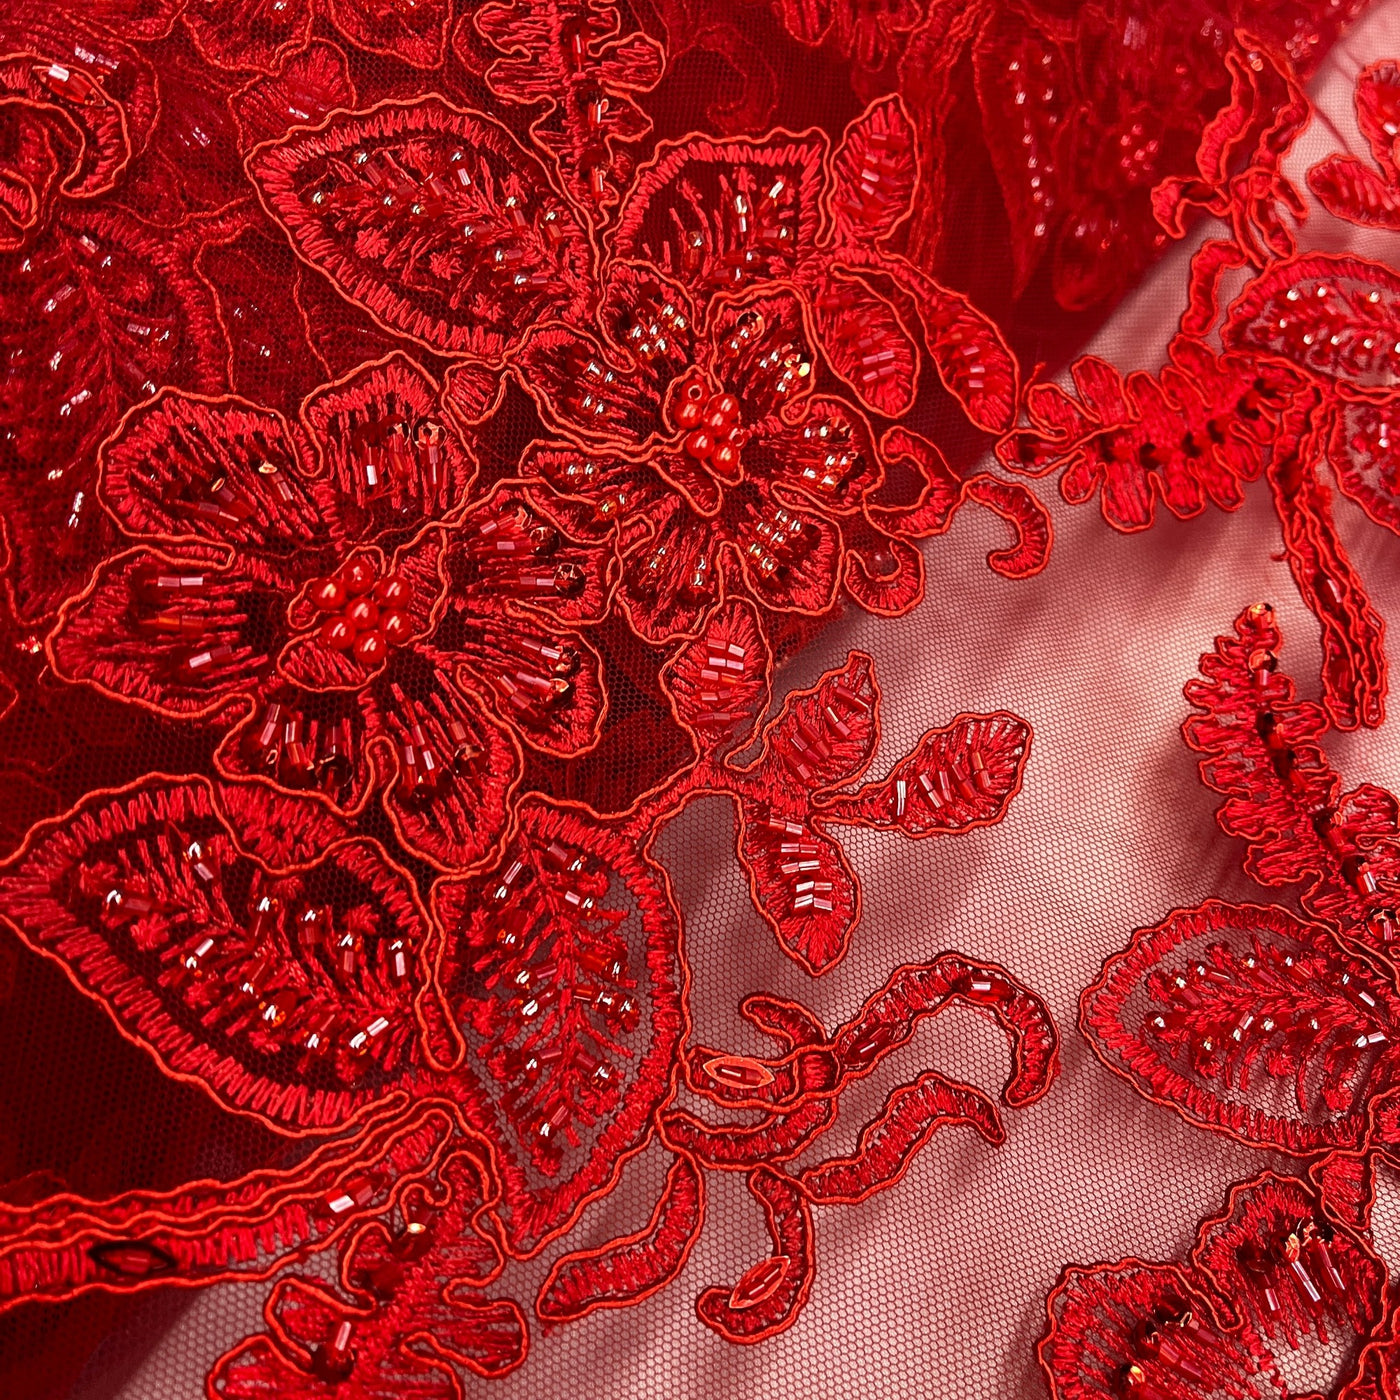 Beaded & Corded Lace Fabric Embroidered on 100% Polyester Net Mesh | Lace USA - GD-1823 Red